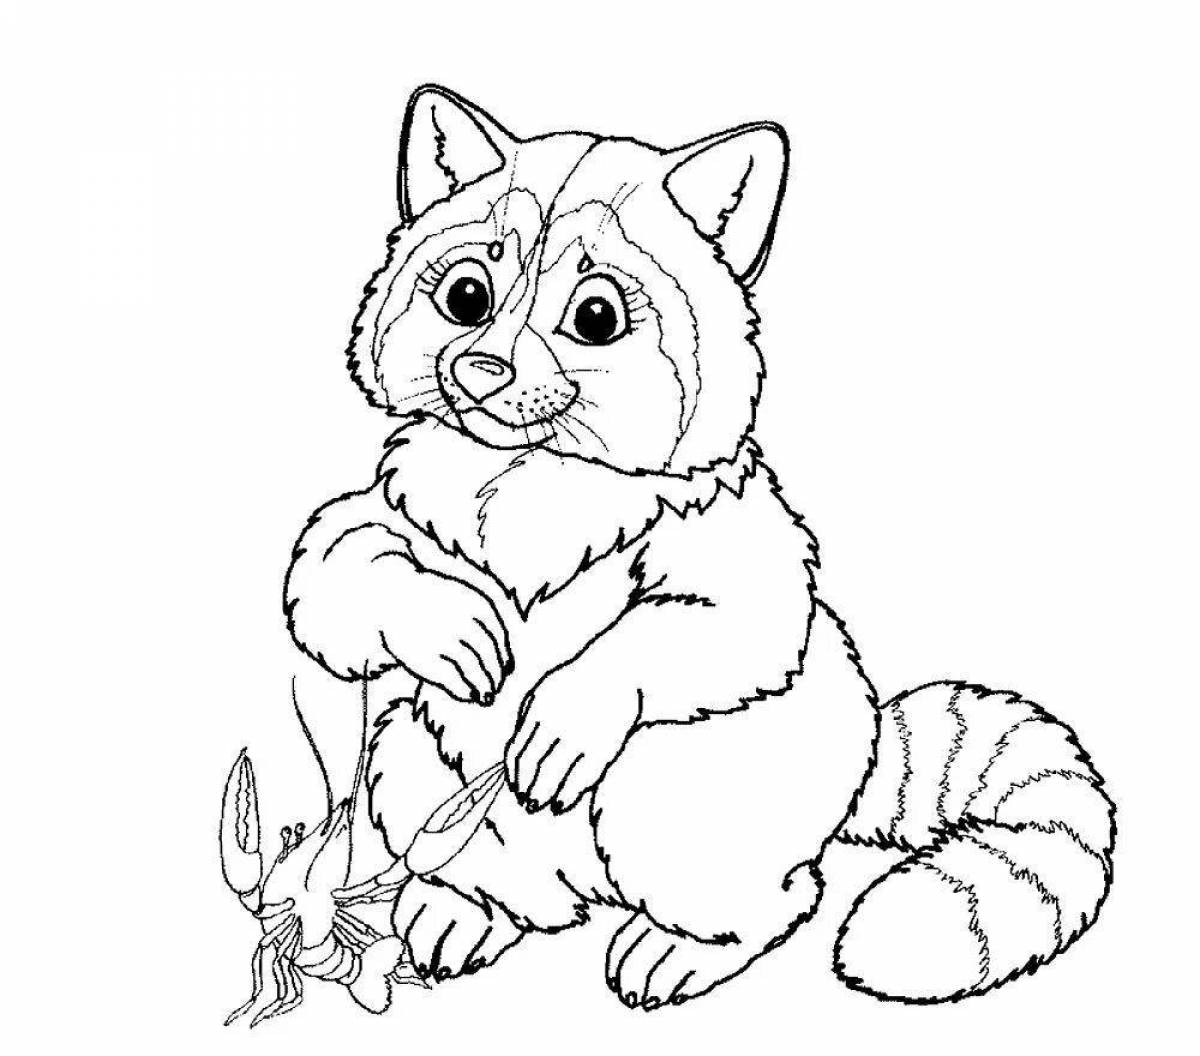 Exquisite animal pattern coloring page